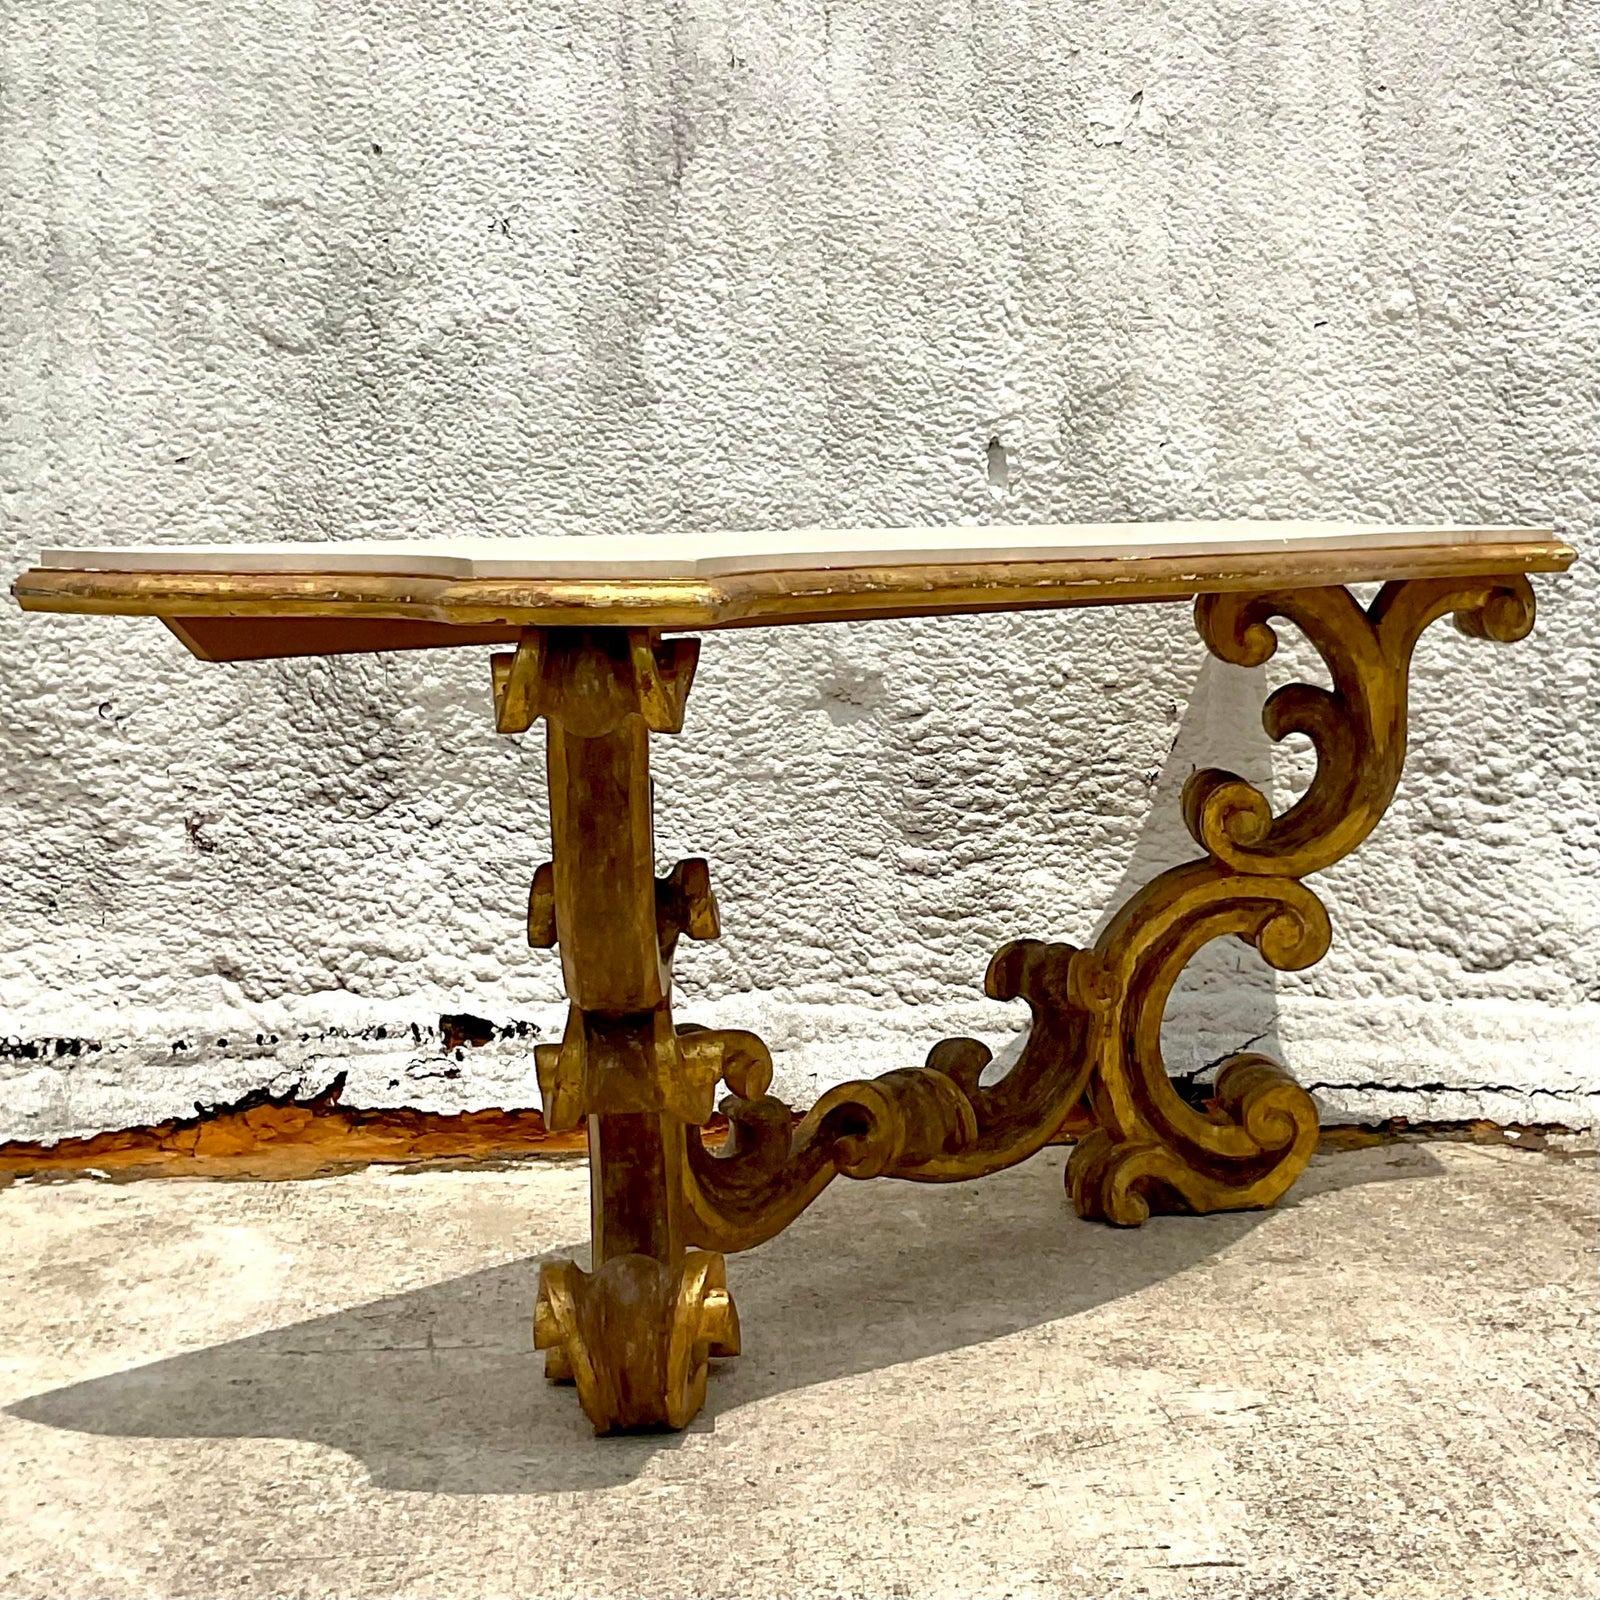 Elevate your space with this Vintage Rococo Gilt Wall Mount Console Table. Exuding opulence and charm, this table features intricate gilt detailing and a wall-mount design, bringing a touch of European-inspired luxury to your American-style décor.